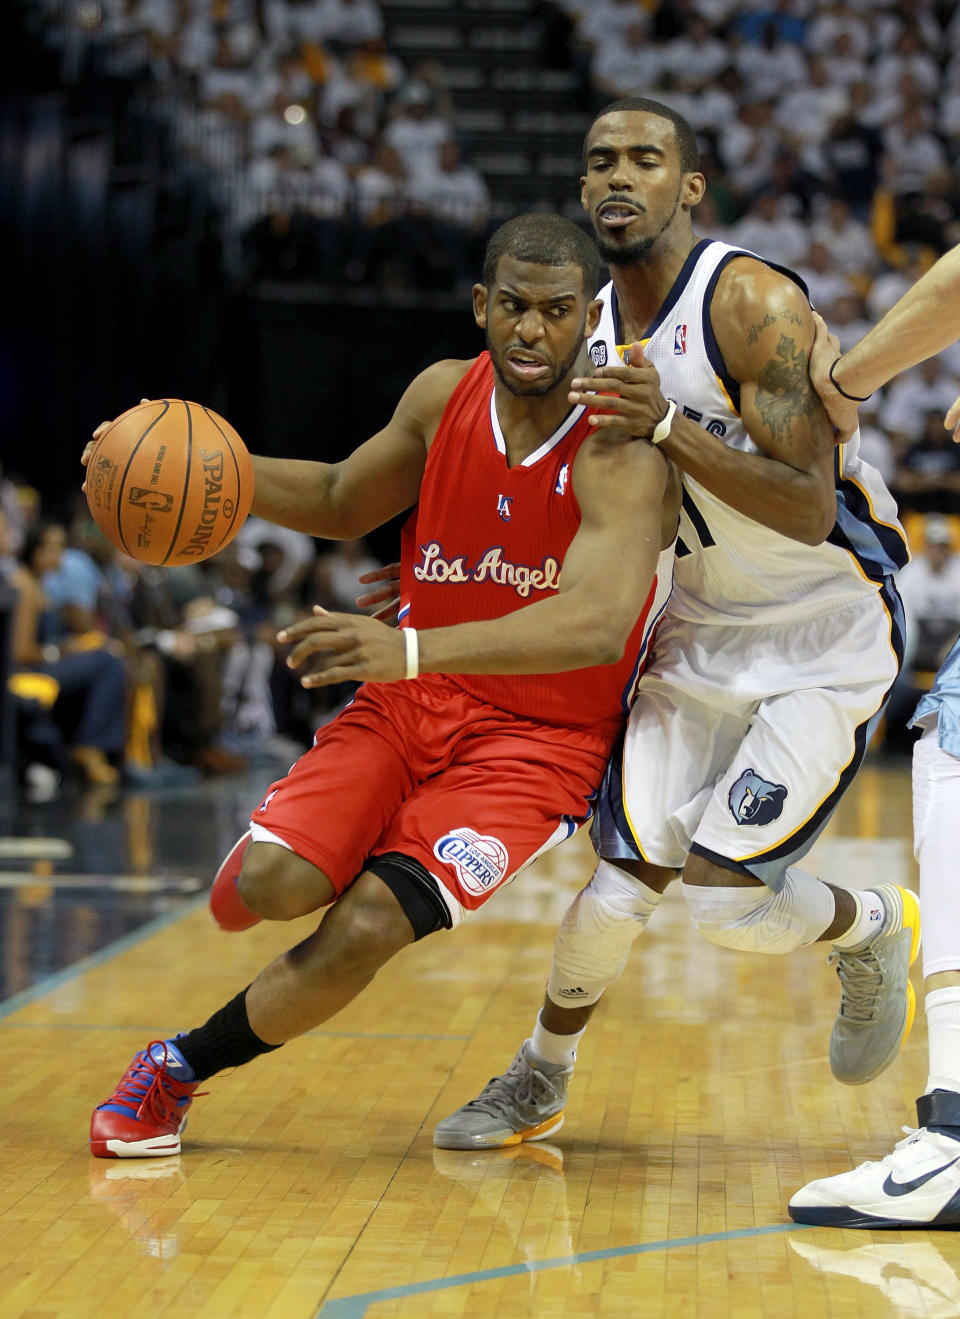 MEMPHIS, TN - APRIL 29: Chris Paul #3 of the Los Angeles Clippers dribbles the ball while defended by Mike Conley #11 of the Memphis Grizzlies the in Game One of the Western Conference Quarterfinals in the 2012 NBA Playoffs at FedExForum on April 29, 2012 in Memphis, Tennessee. NOTE TO USER: User expressly acknowledges and agrees that, by downloading and or using this photograph, User is consenting to the terms and conditions of the Getty Images License Agreement. (Photo by Andy Lyons/Getty Images)